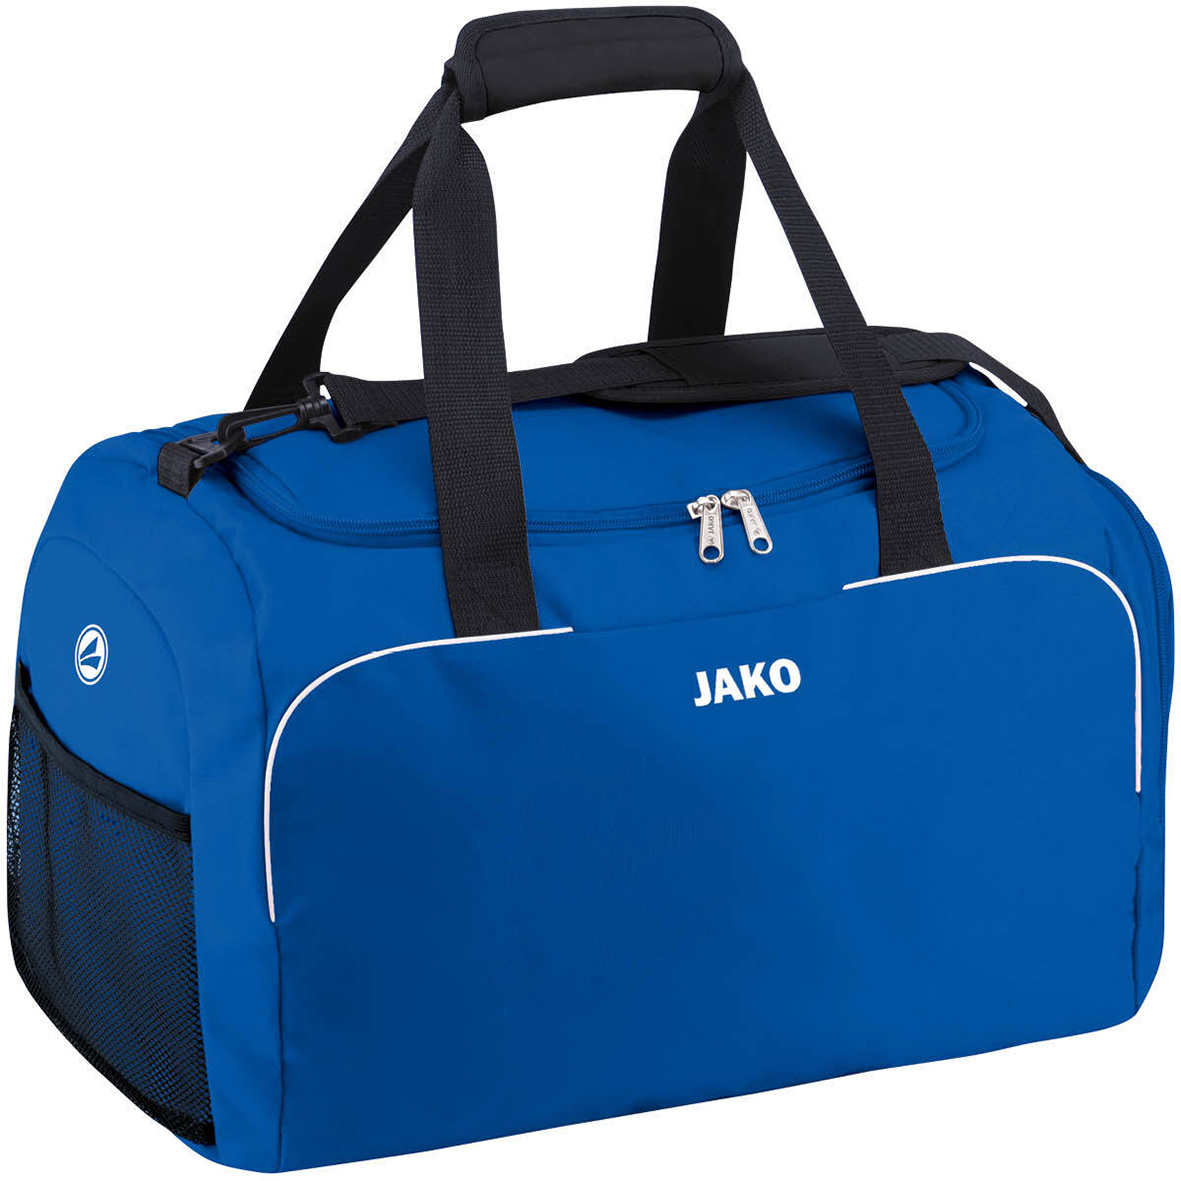 SPORTS BAG JAKO CLASSICO WITH SIDE WET COMPARTMENTS, ROYAL.